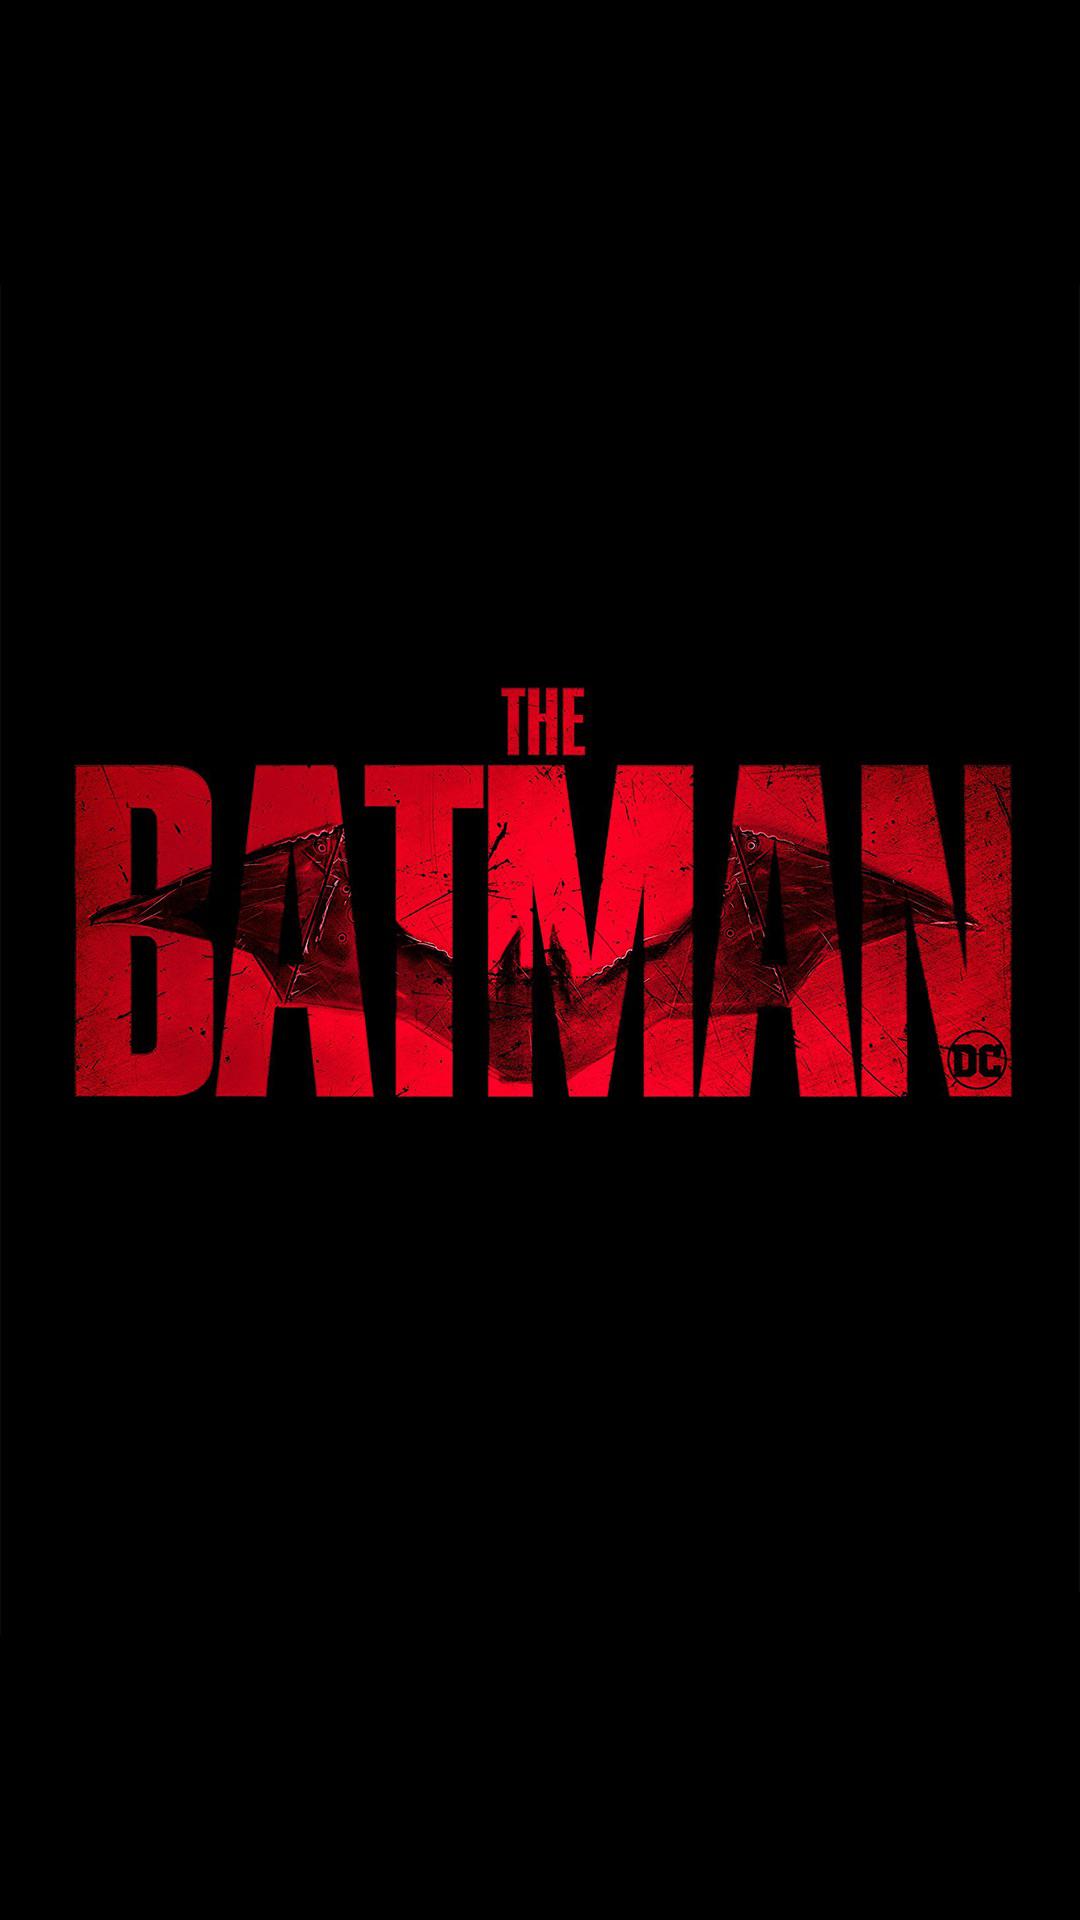 Made an iPhone sized wallpaper of the new “The Batman” logo in case anyone needs it!